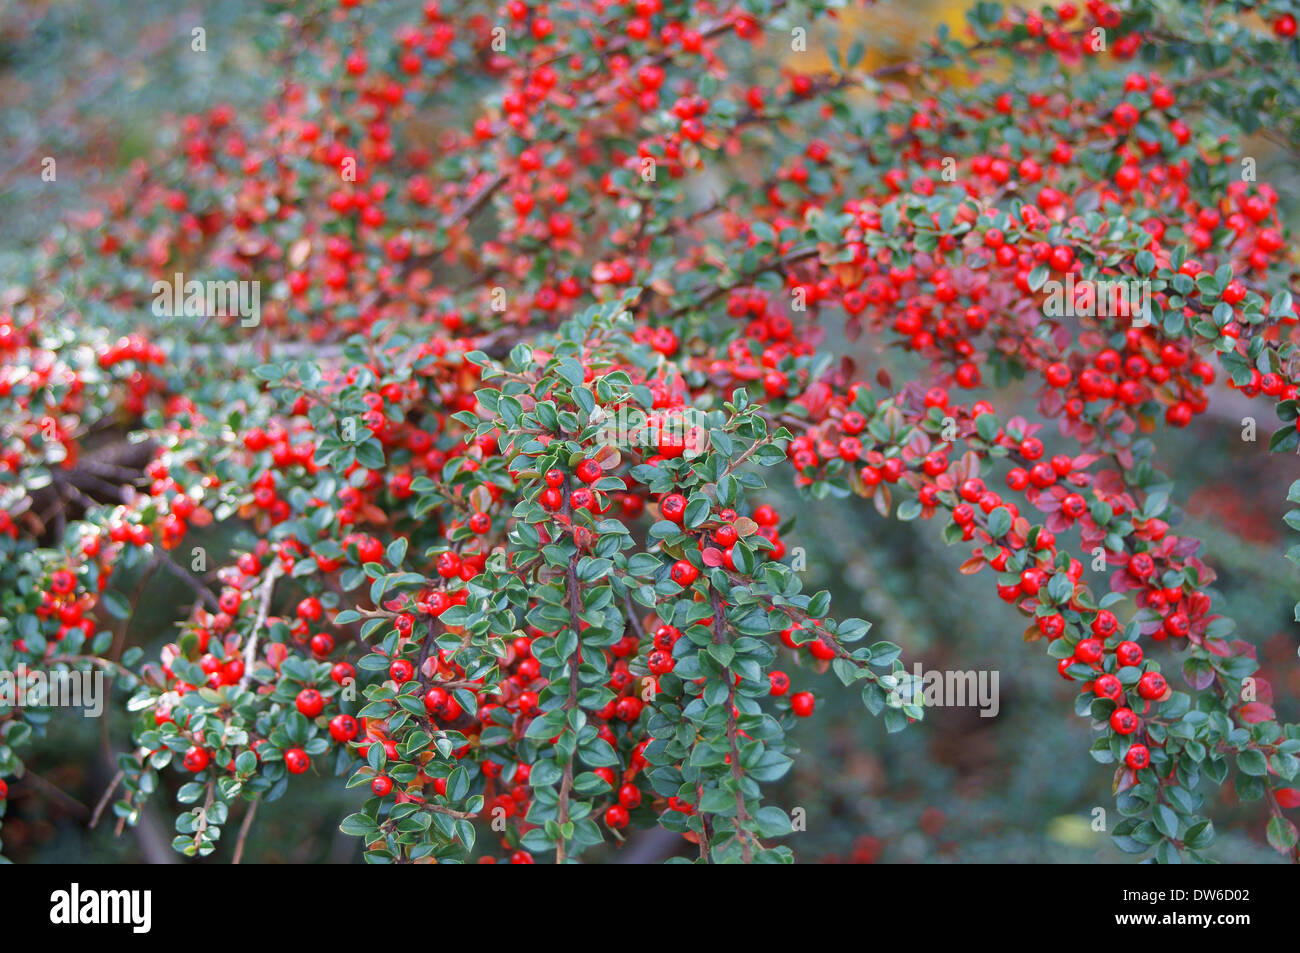 Cotoneaster rich red autumn berries Stock Photo